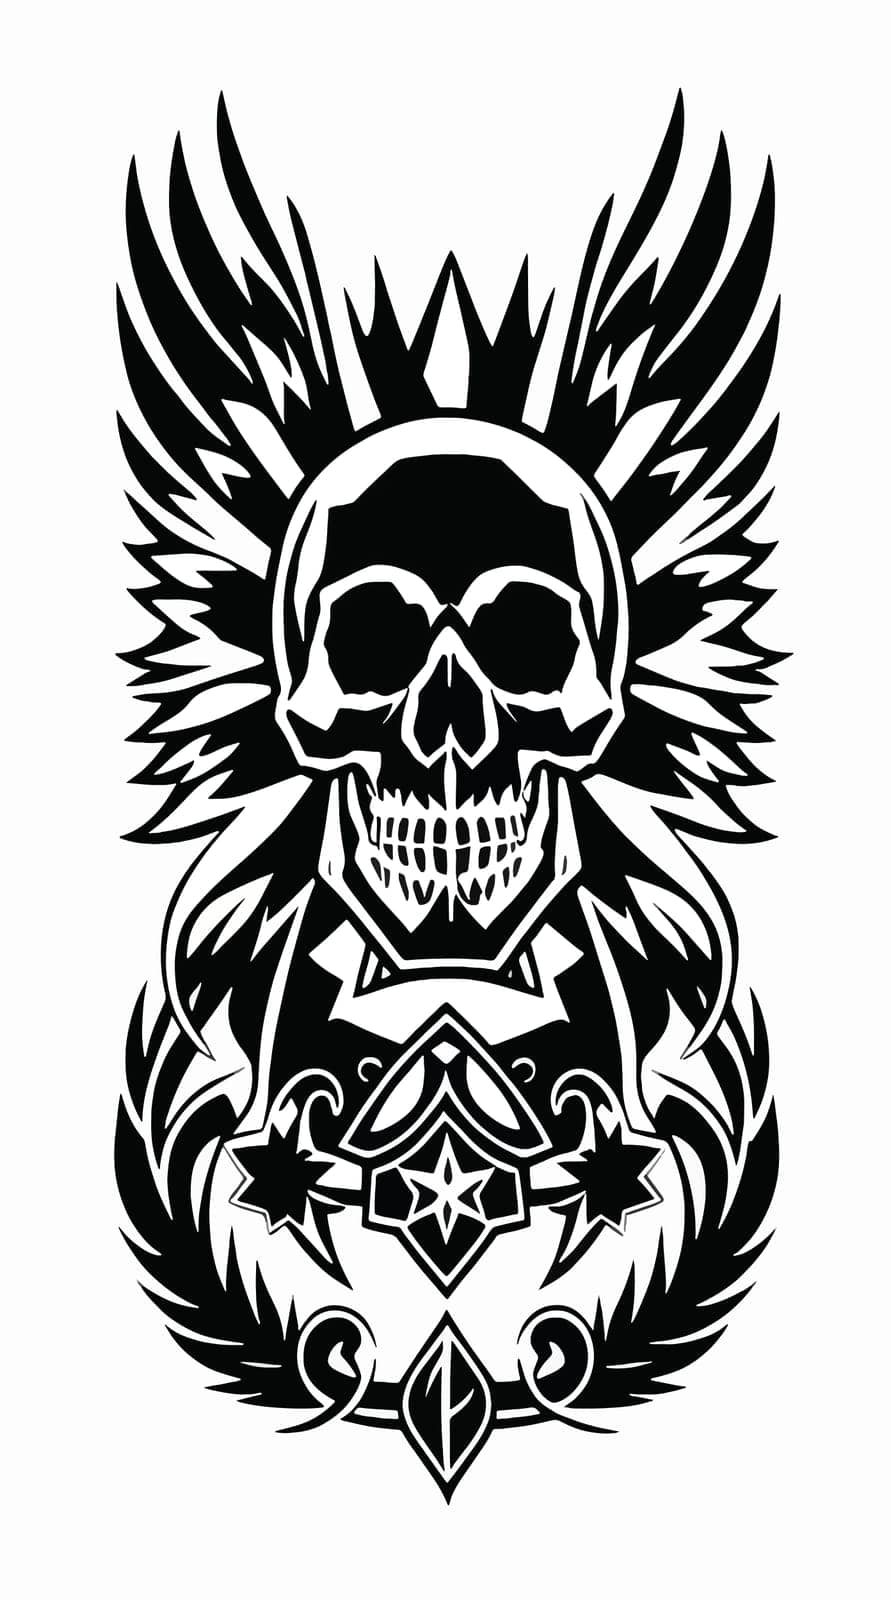 Great Skull Vector With Wings. Skull Vector by luisalfonso89